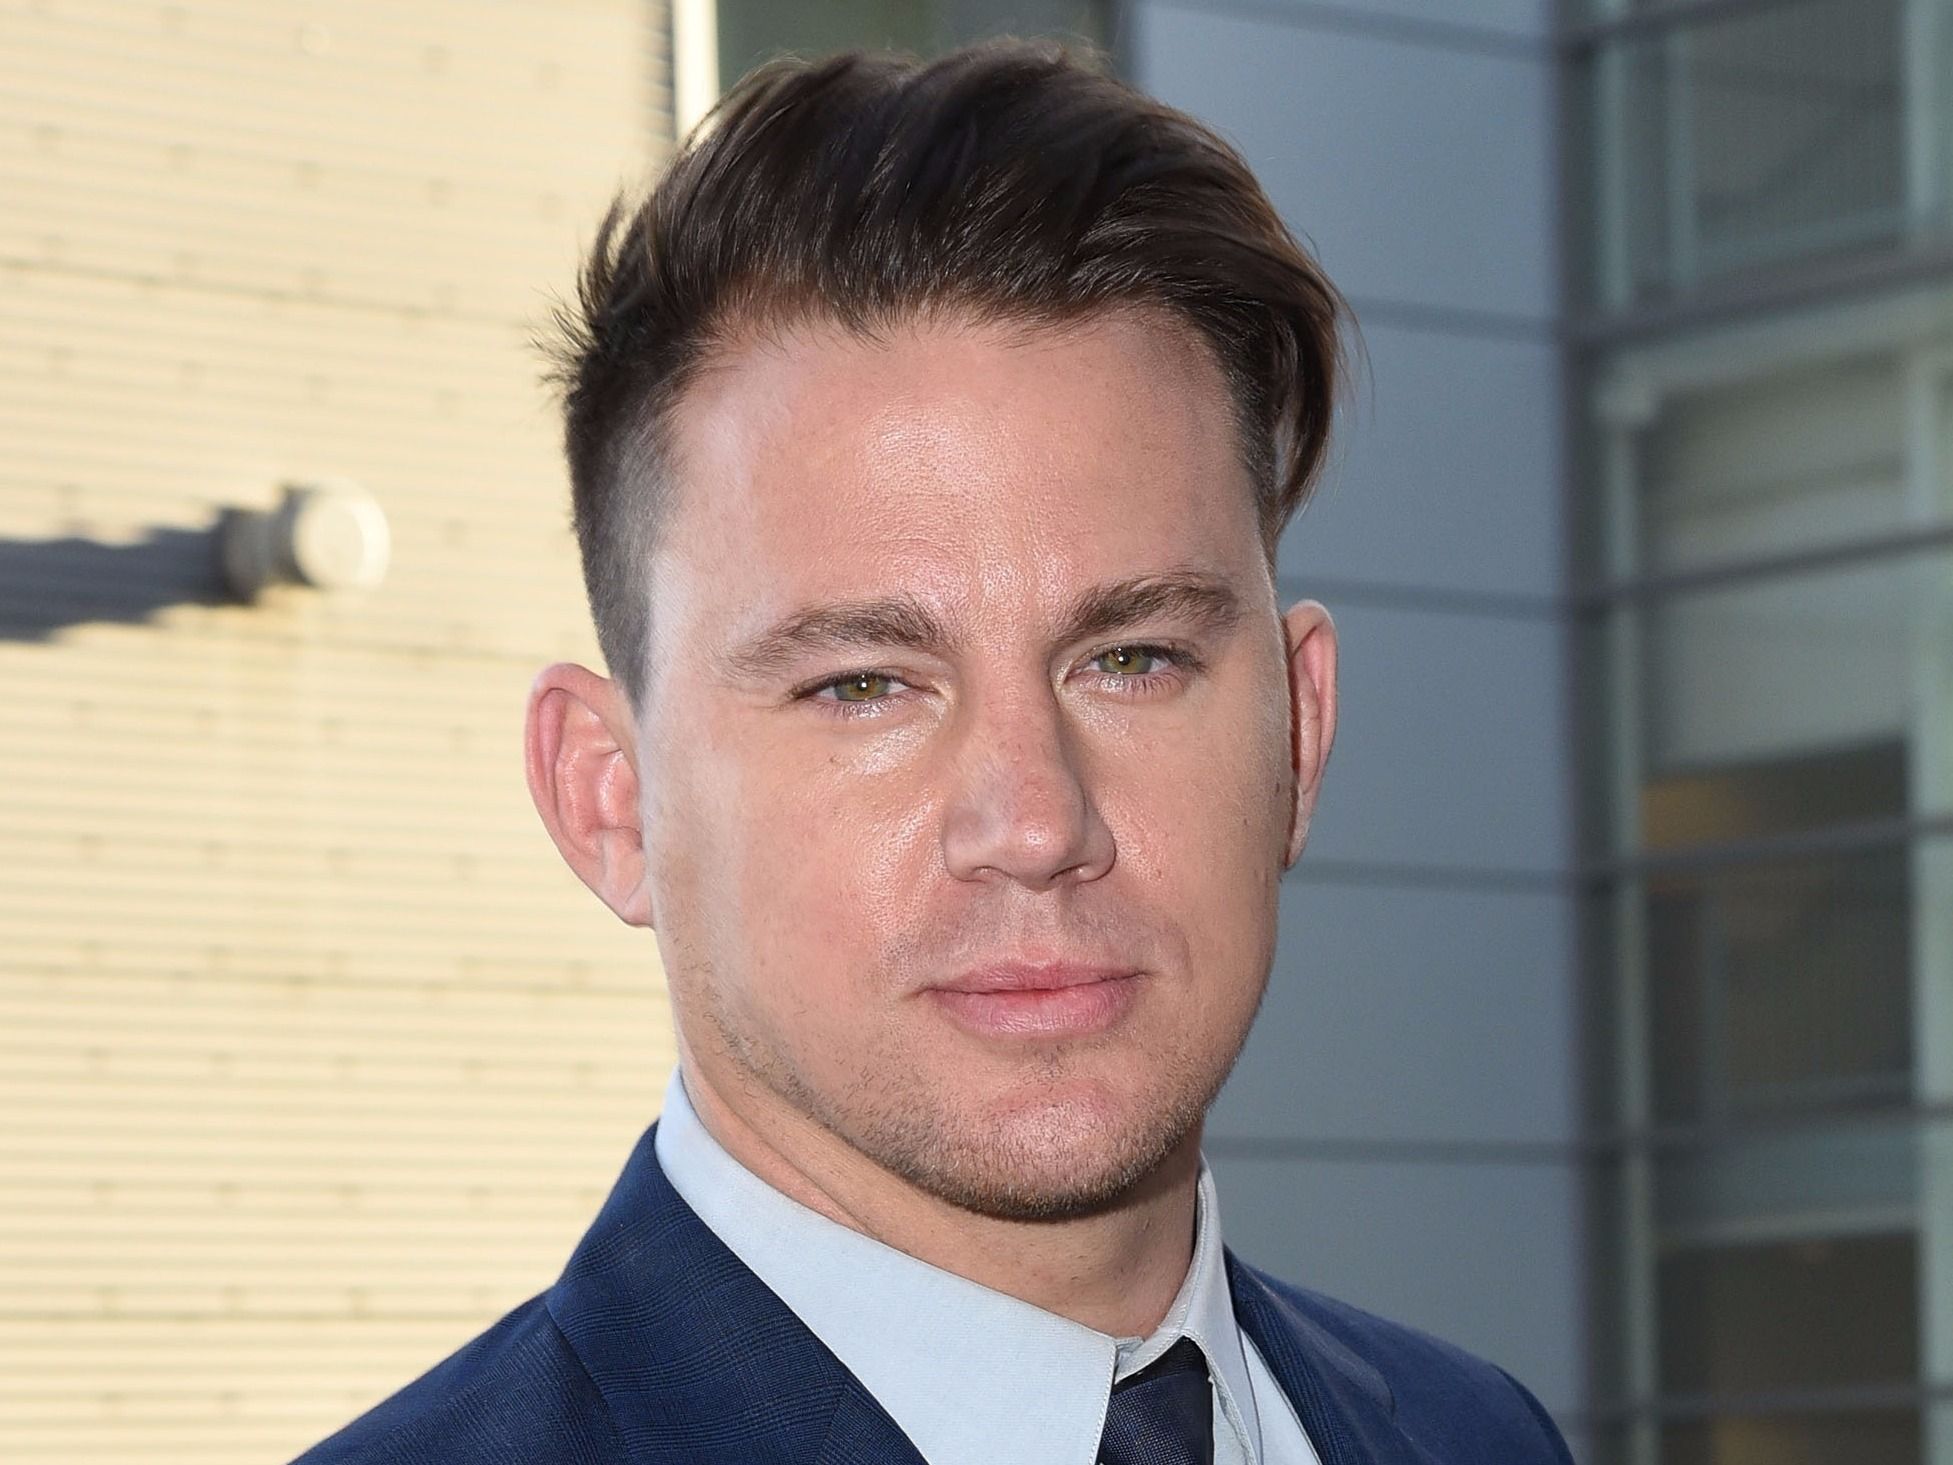 channing-tatum-shows-off-his-first-ever-bike-jump-as-he-trains-for-the-upcoming-evil-knievel-biopic-ab89fec0261cd81c3b0739fdf7026964.jpg